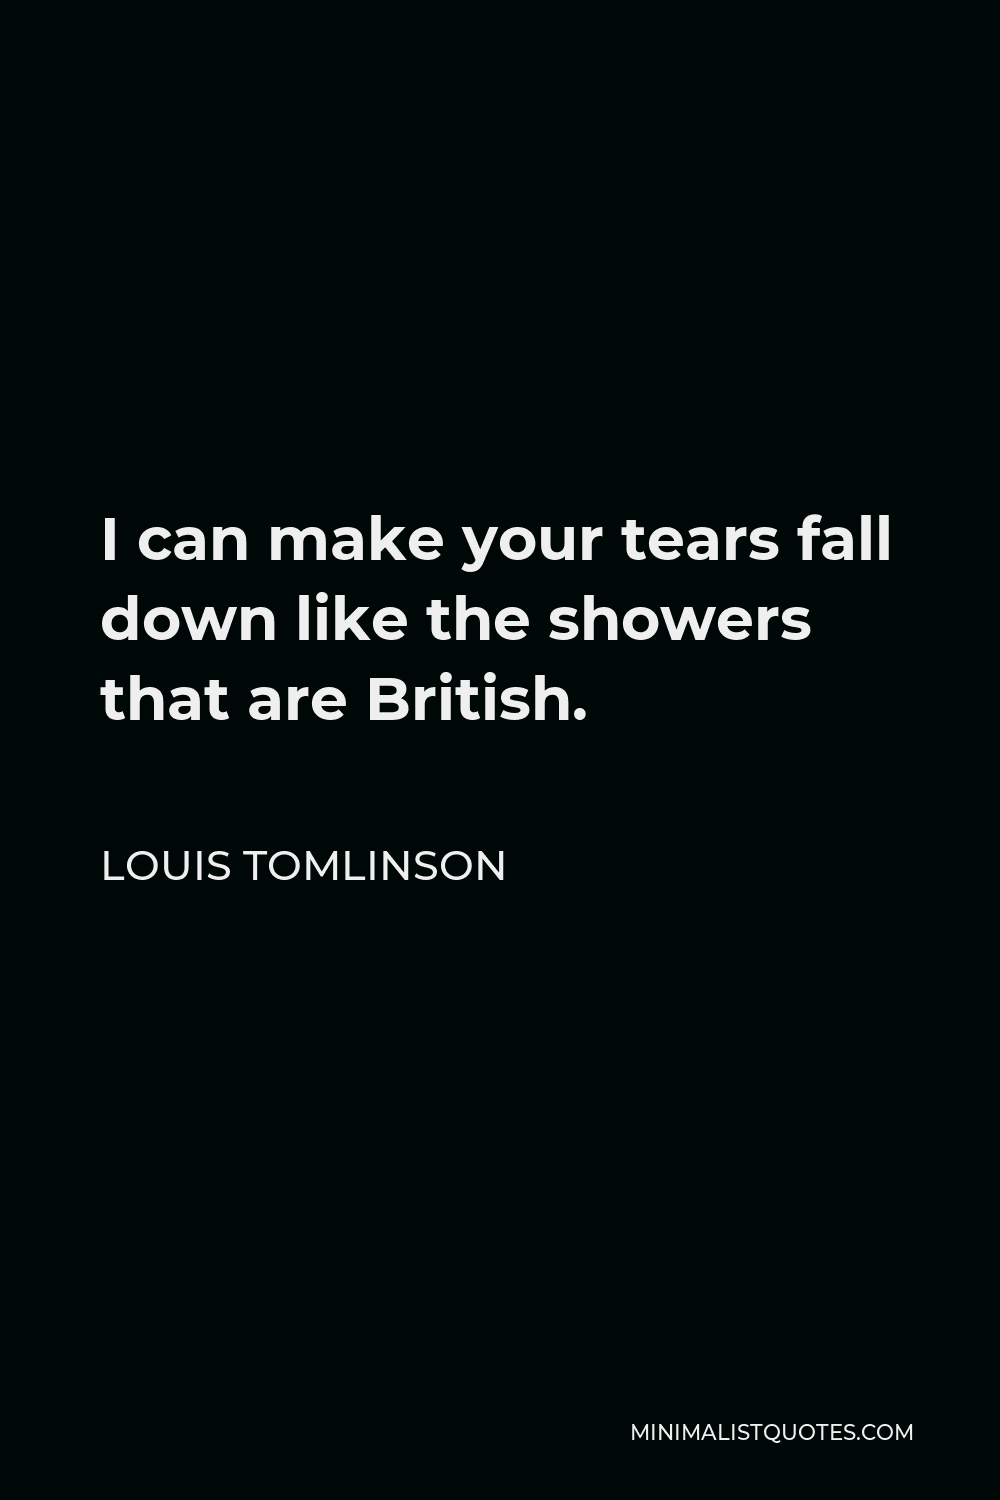 Louis Tomlinson Quote - I can make your tears fall down like the showers that are British.